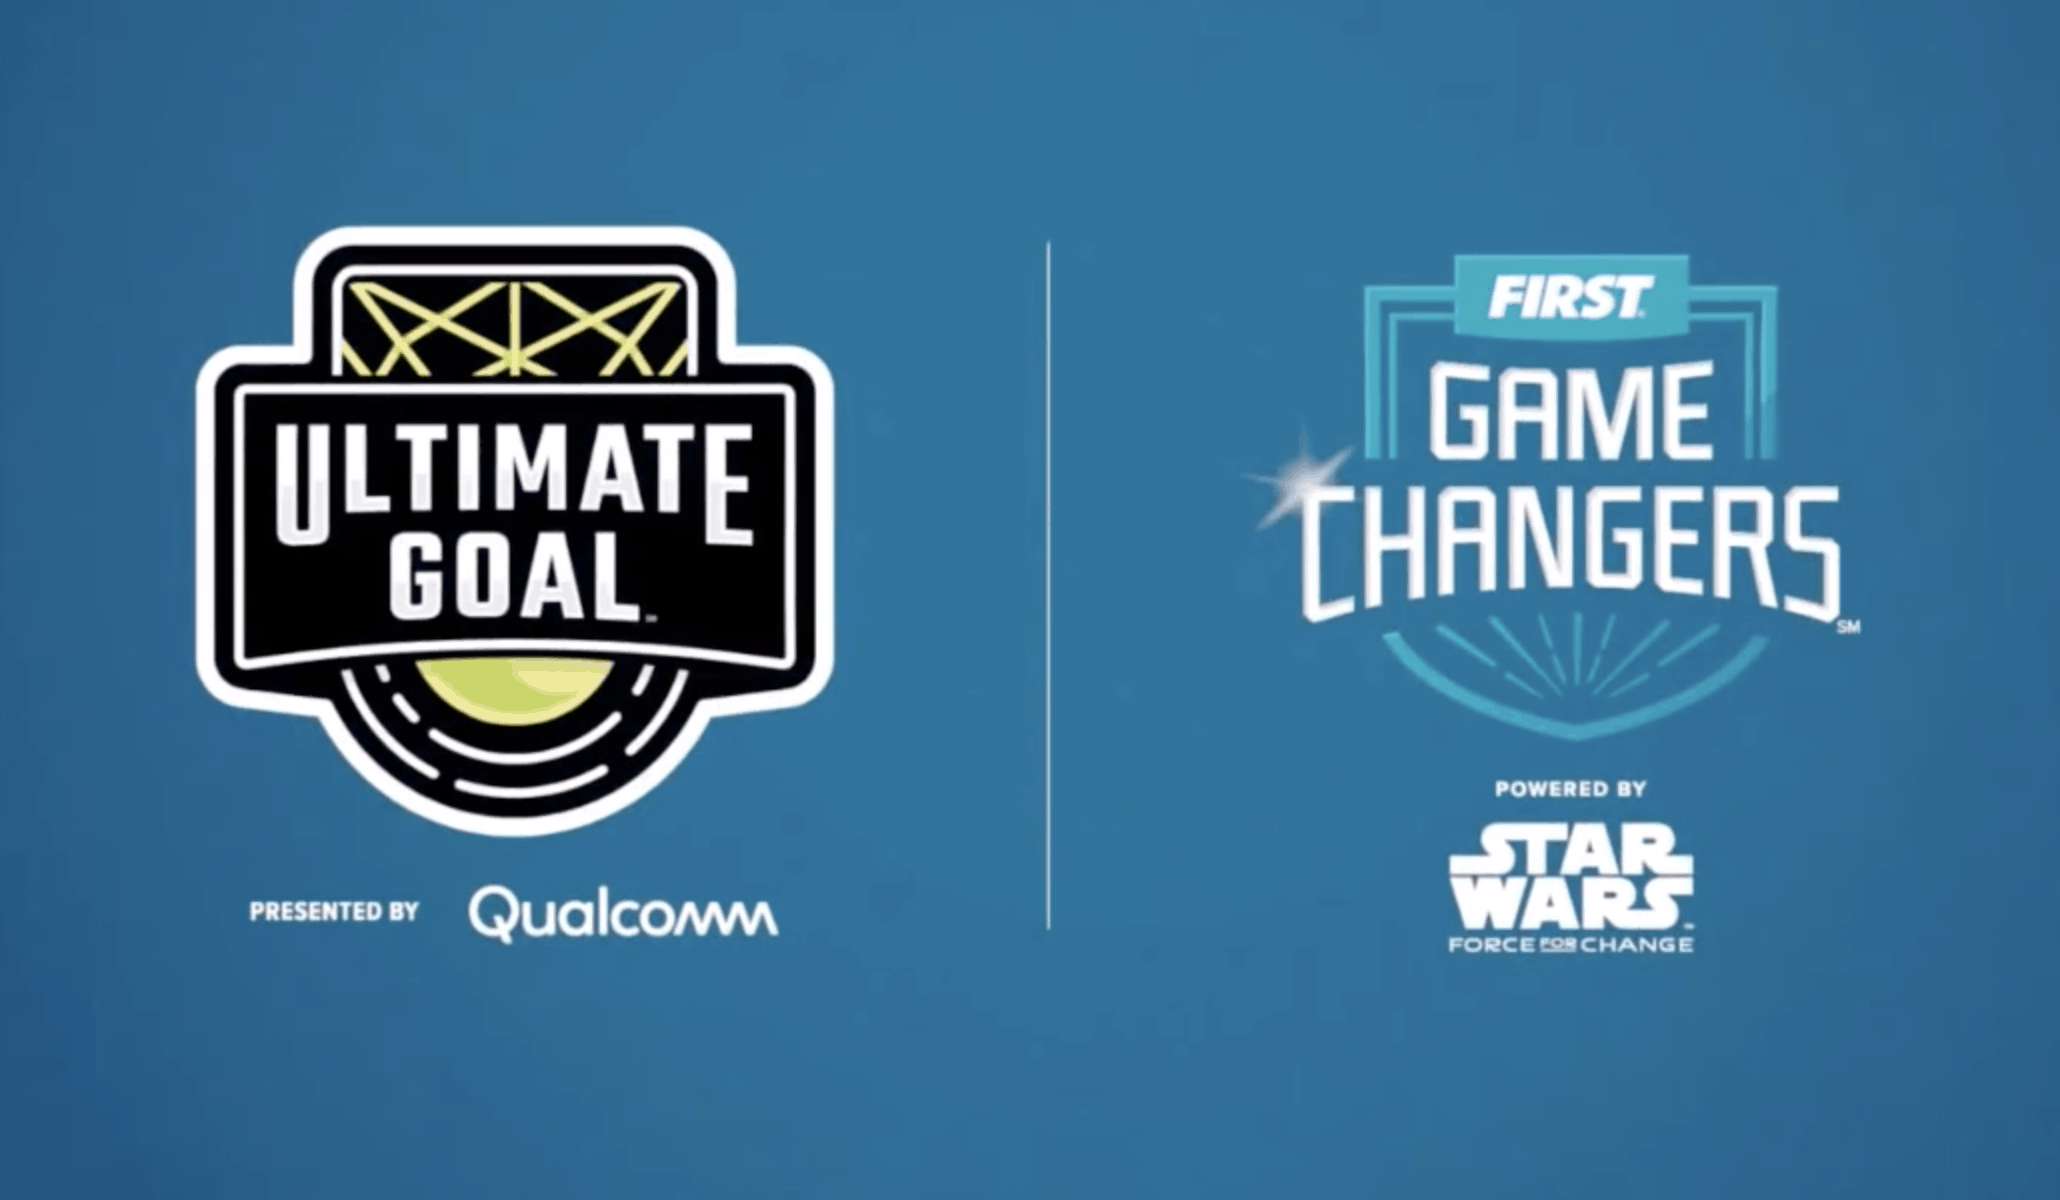 FIRST Tech Challenge ULTIMATE GOAL powered by STAR WARS Force For Change logos